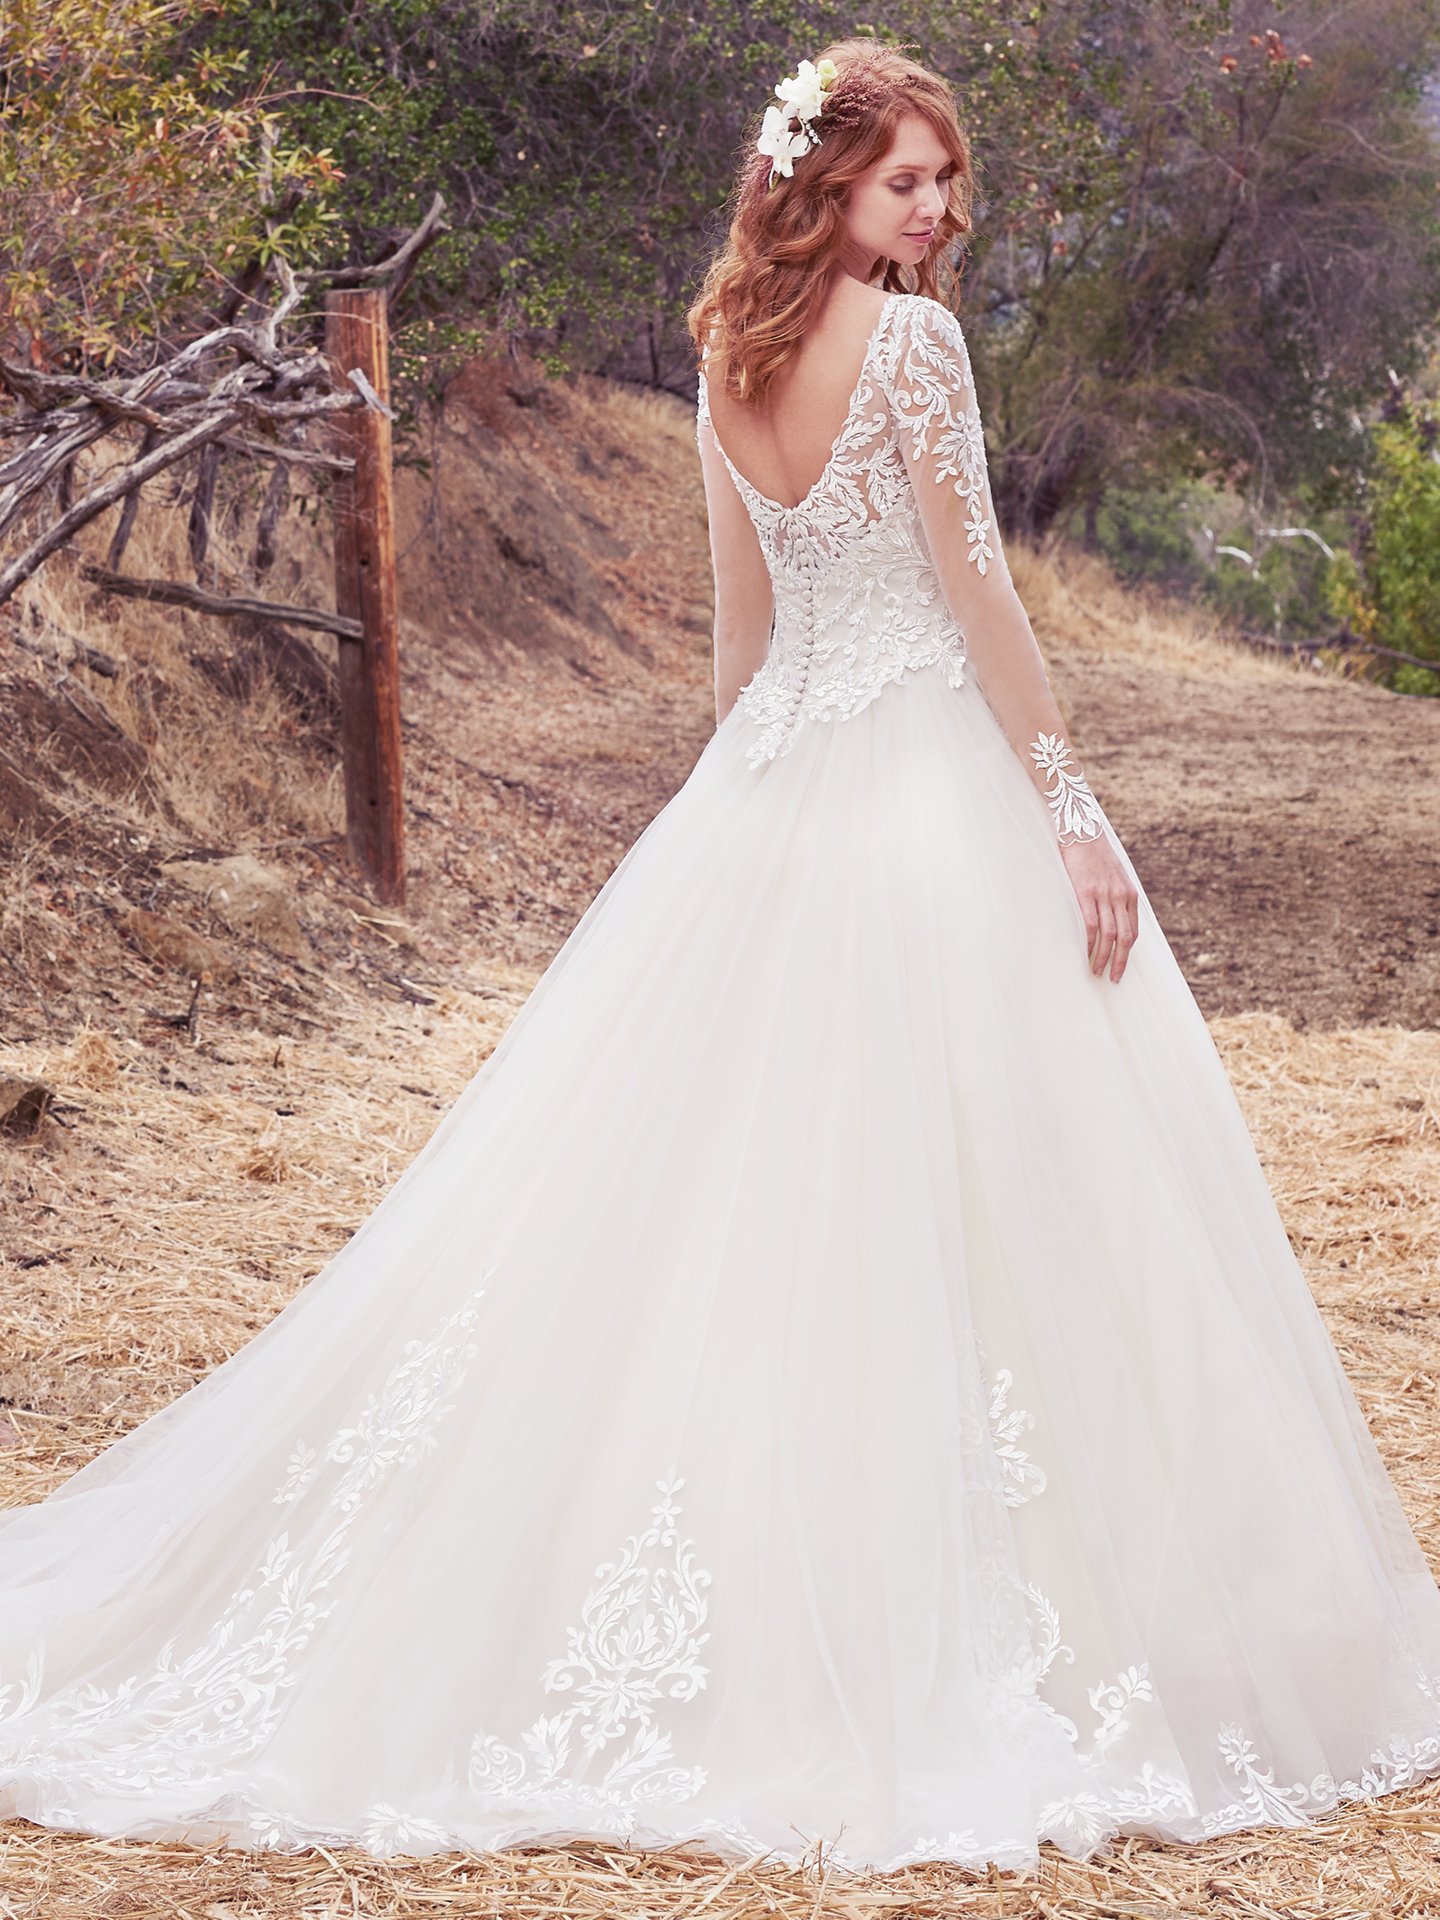 Full-length sleeve wedding dress with covereage Berkley by Maggie Sottero. Modern Royalty: Wedding Dresses Inspired by the Royal Engagement